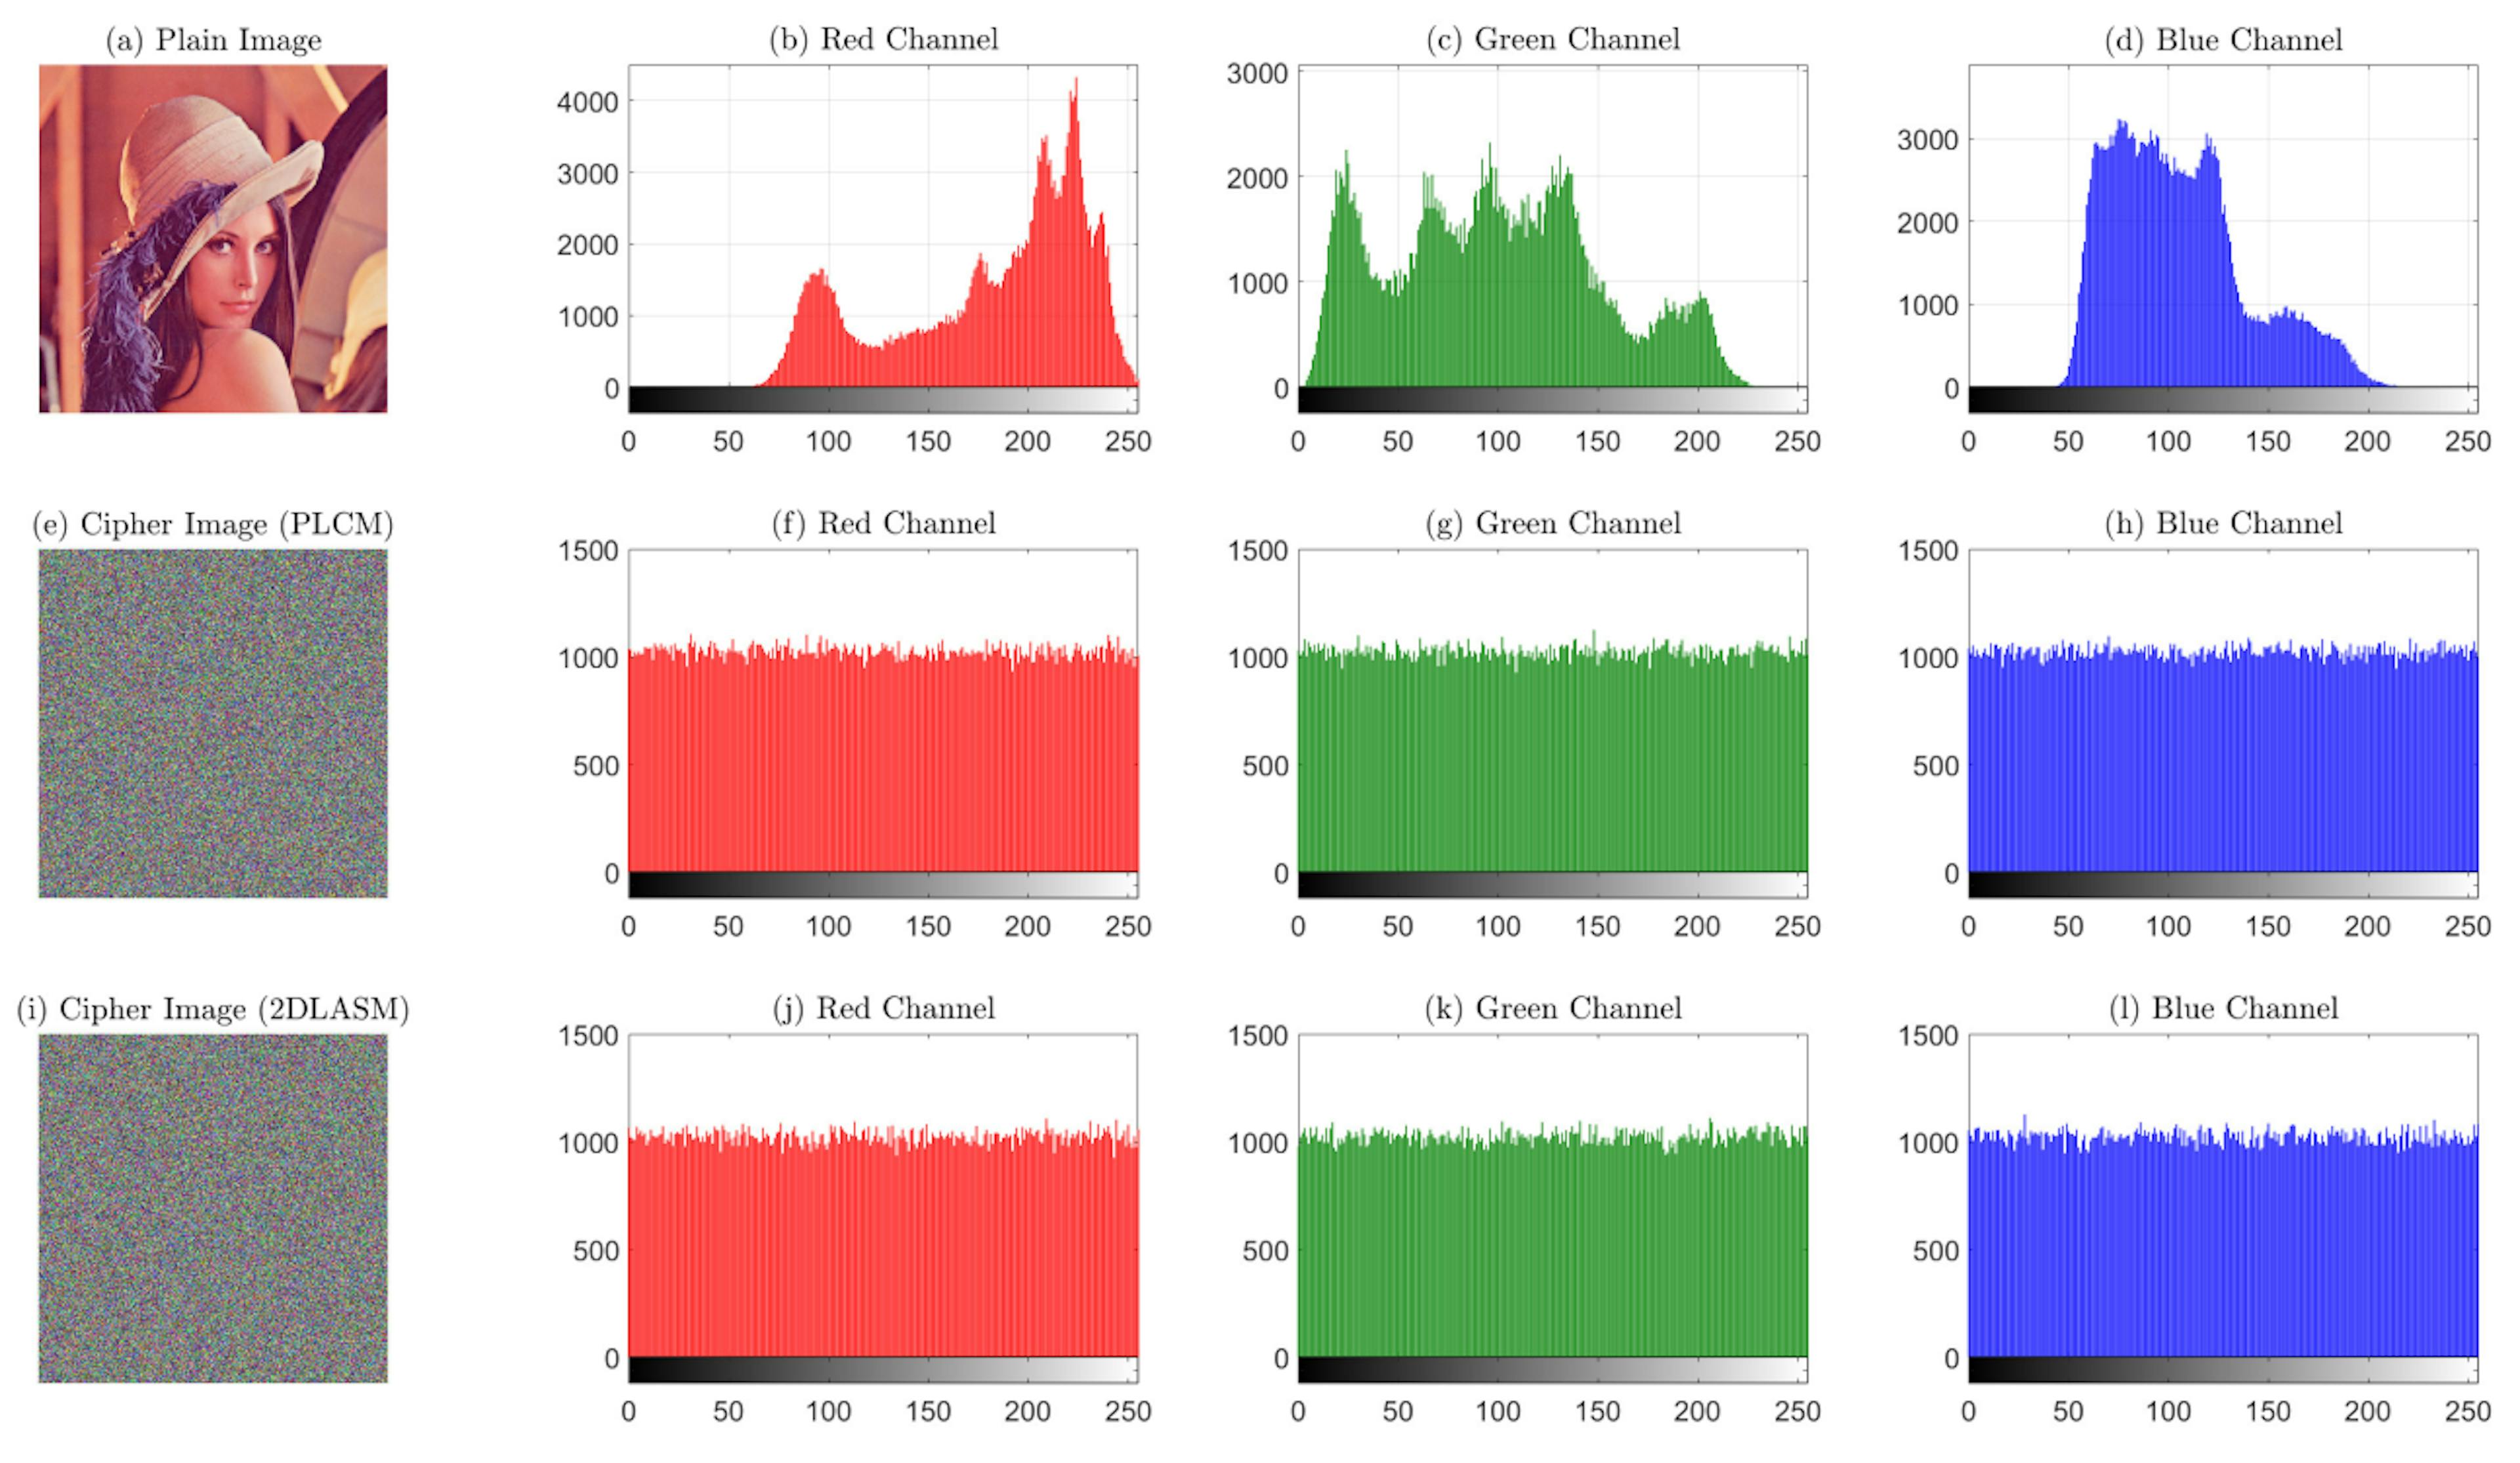 Figure 3: Histograms of plain and cipher images. (a) plain image Lena, (b) - (d) histograms of the red, green, and blue channels of the plain image, (e) cipher image encrypted with PLCM, (f) - (h) histograms of the red, green, and blue channels of the cipher image encrypted with PLCM, (i) cipher image encrypted with 2DLASM, (h) - (j) histograms of the red, green, and blue channels of the cipher image encrypted with 2DLASM.